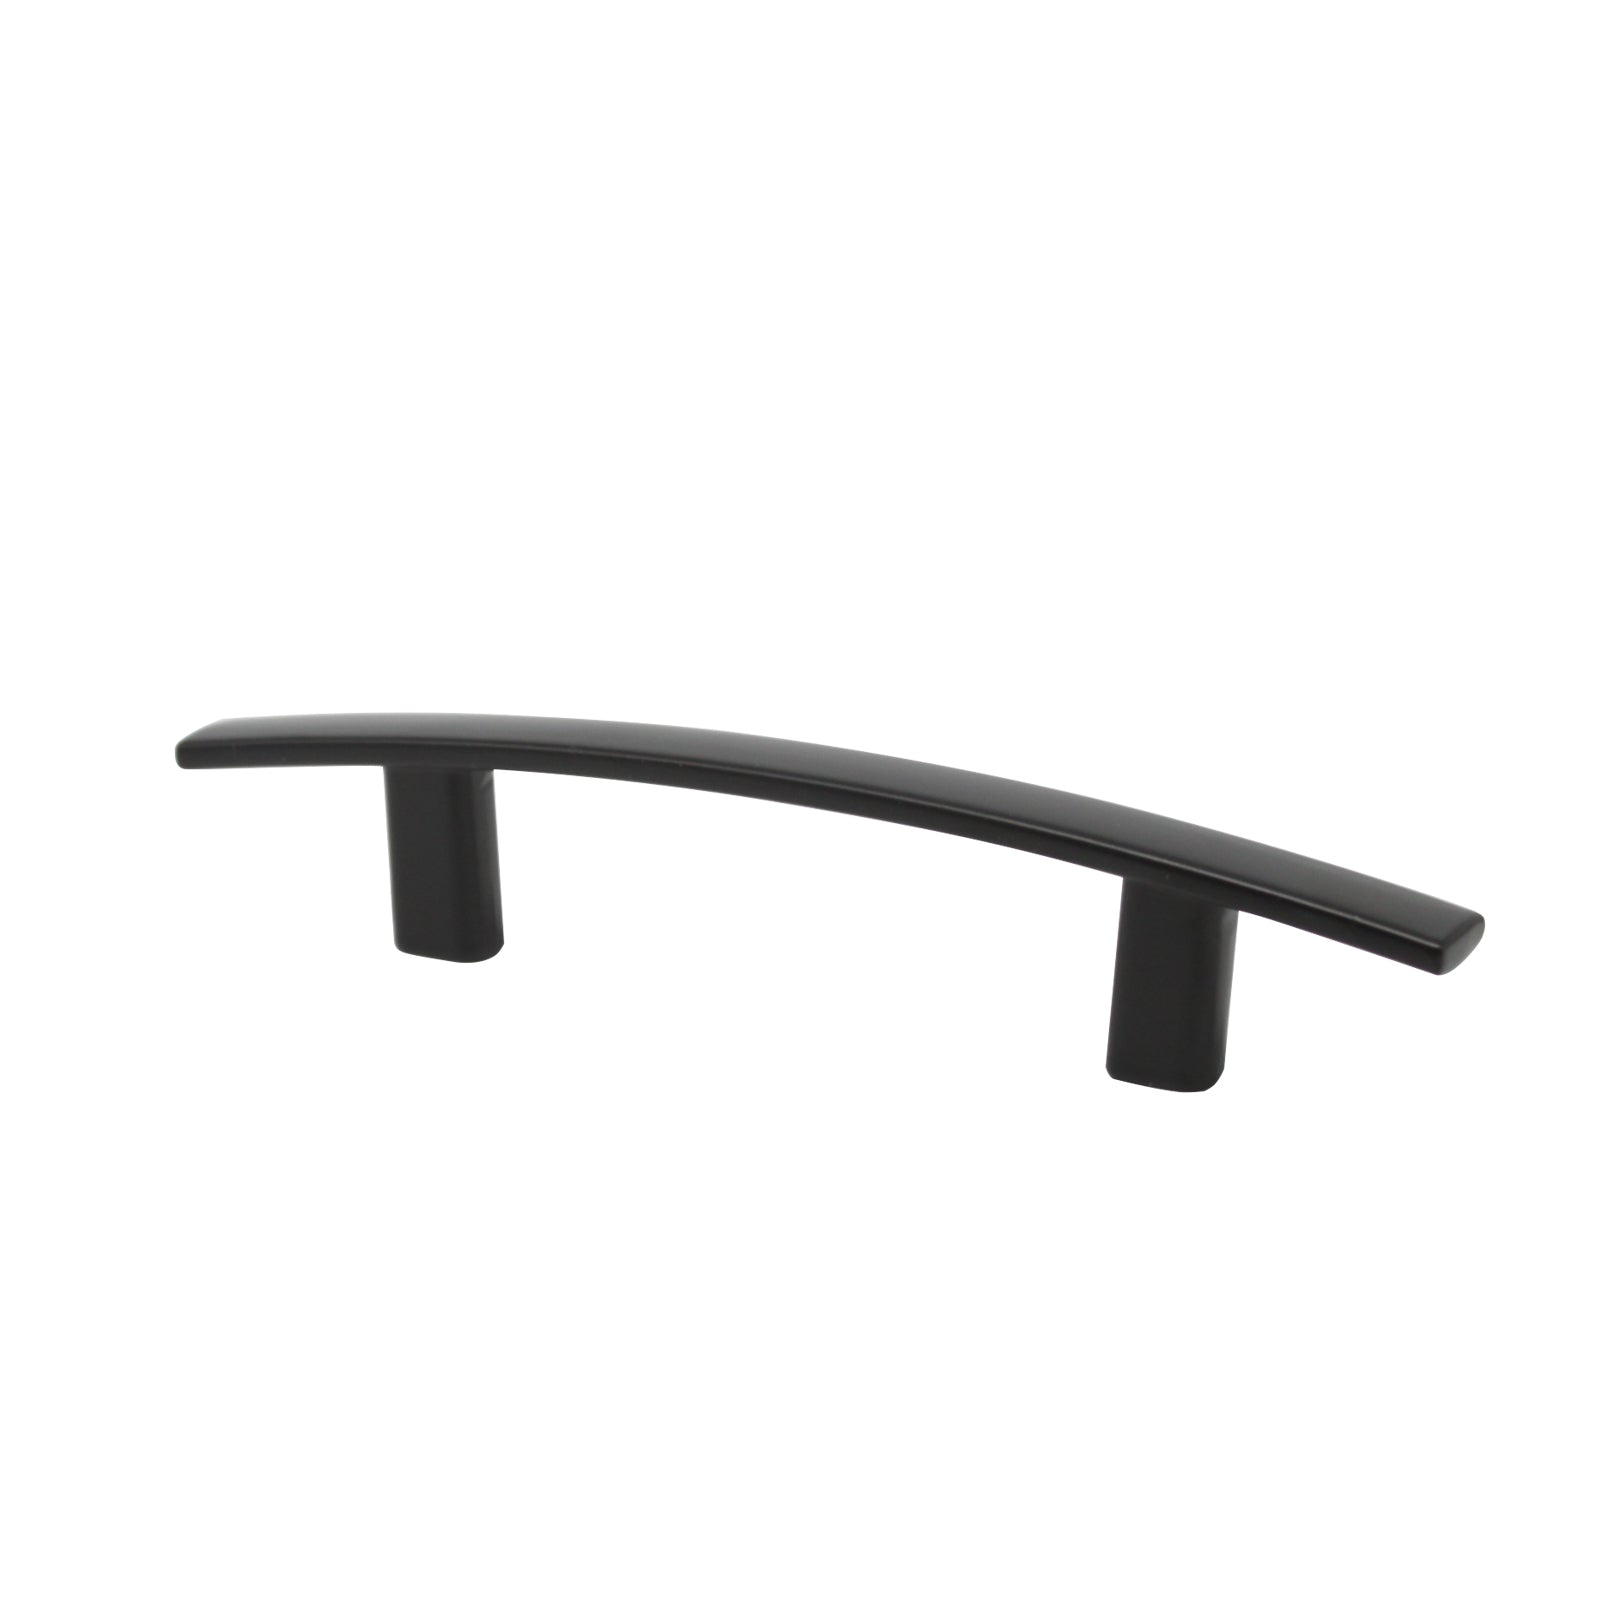 Curved Subtle Arch Cabinet Handles 3inch 76mm Hole Centers Black Finish PD81670BK76